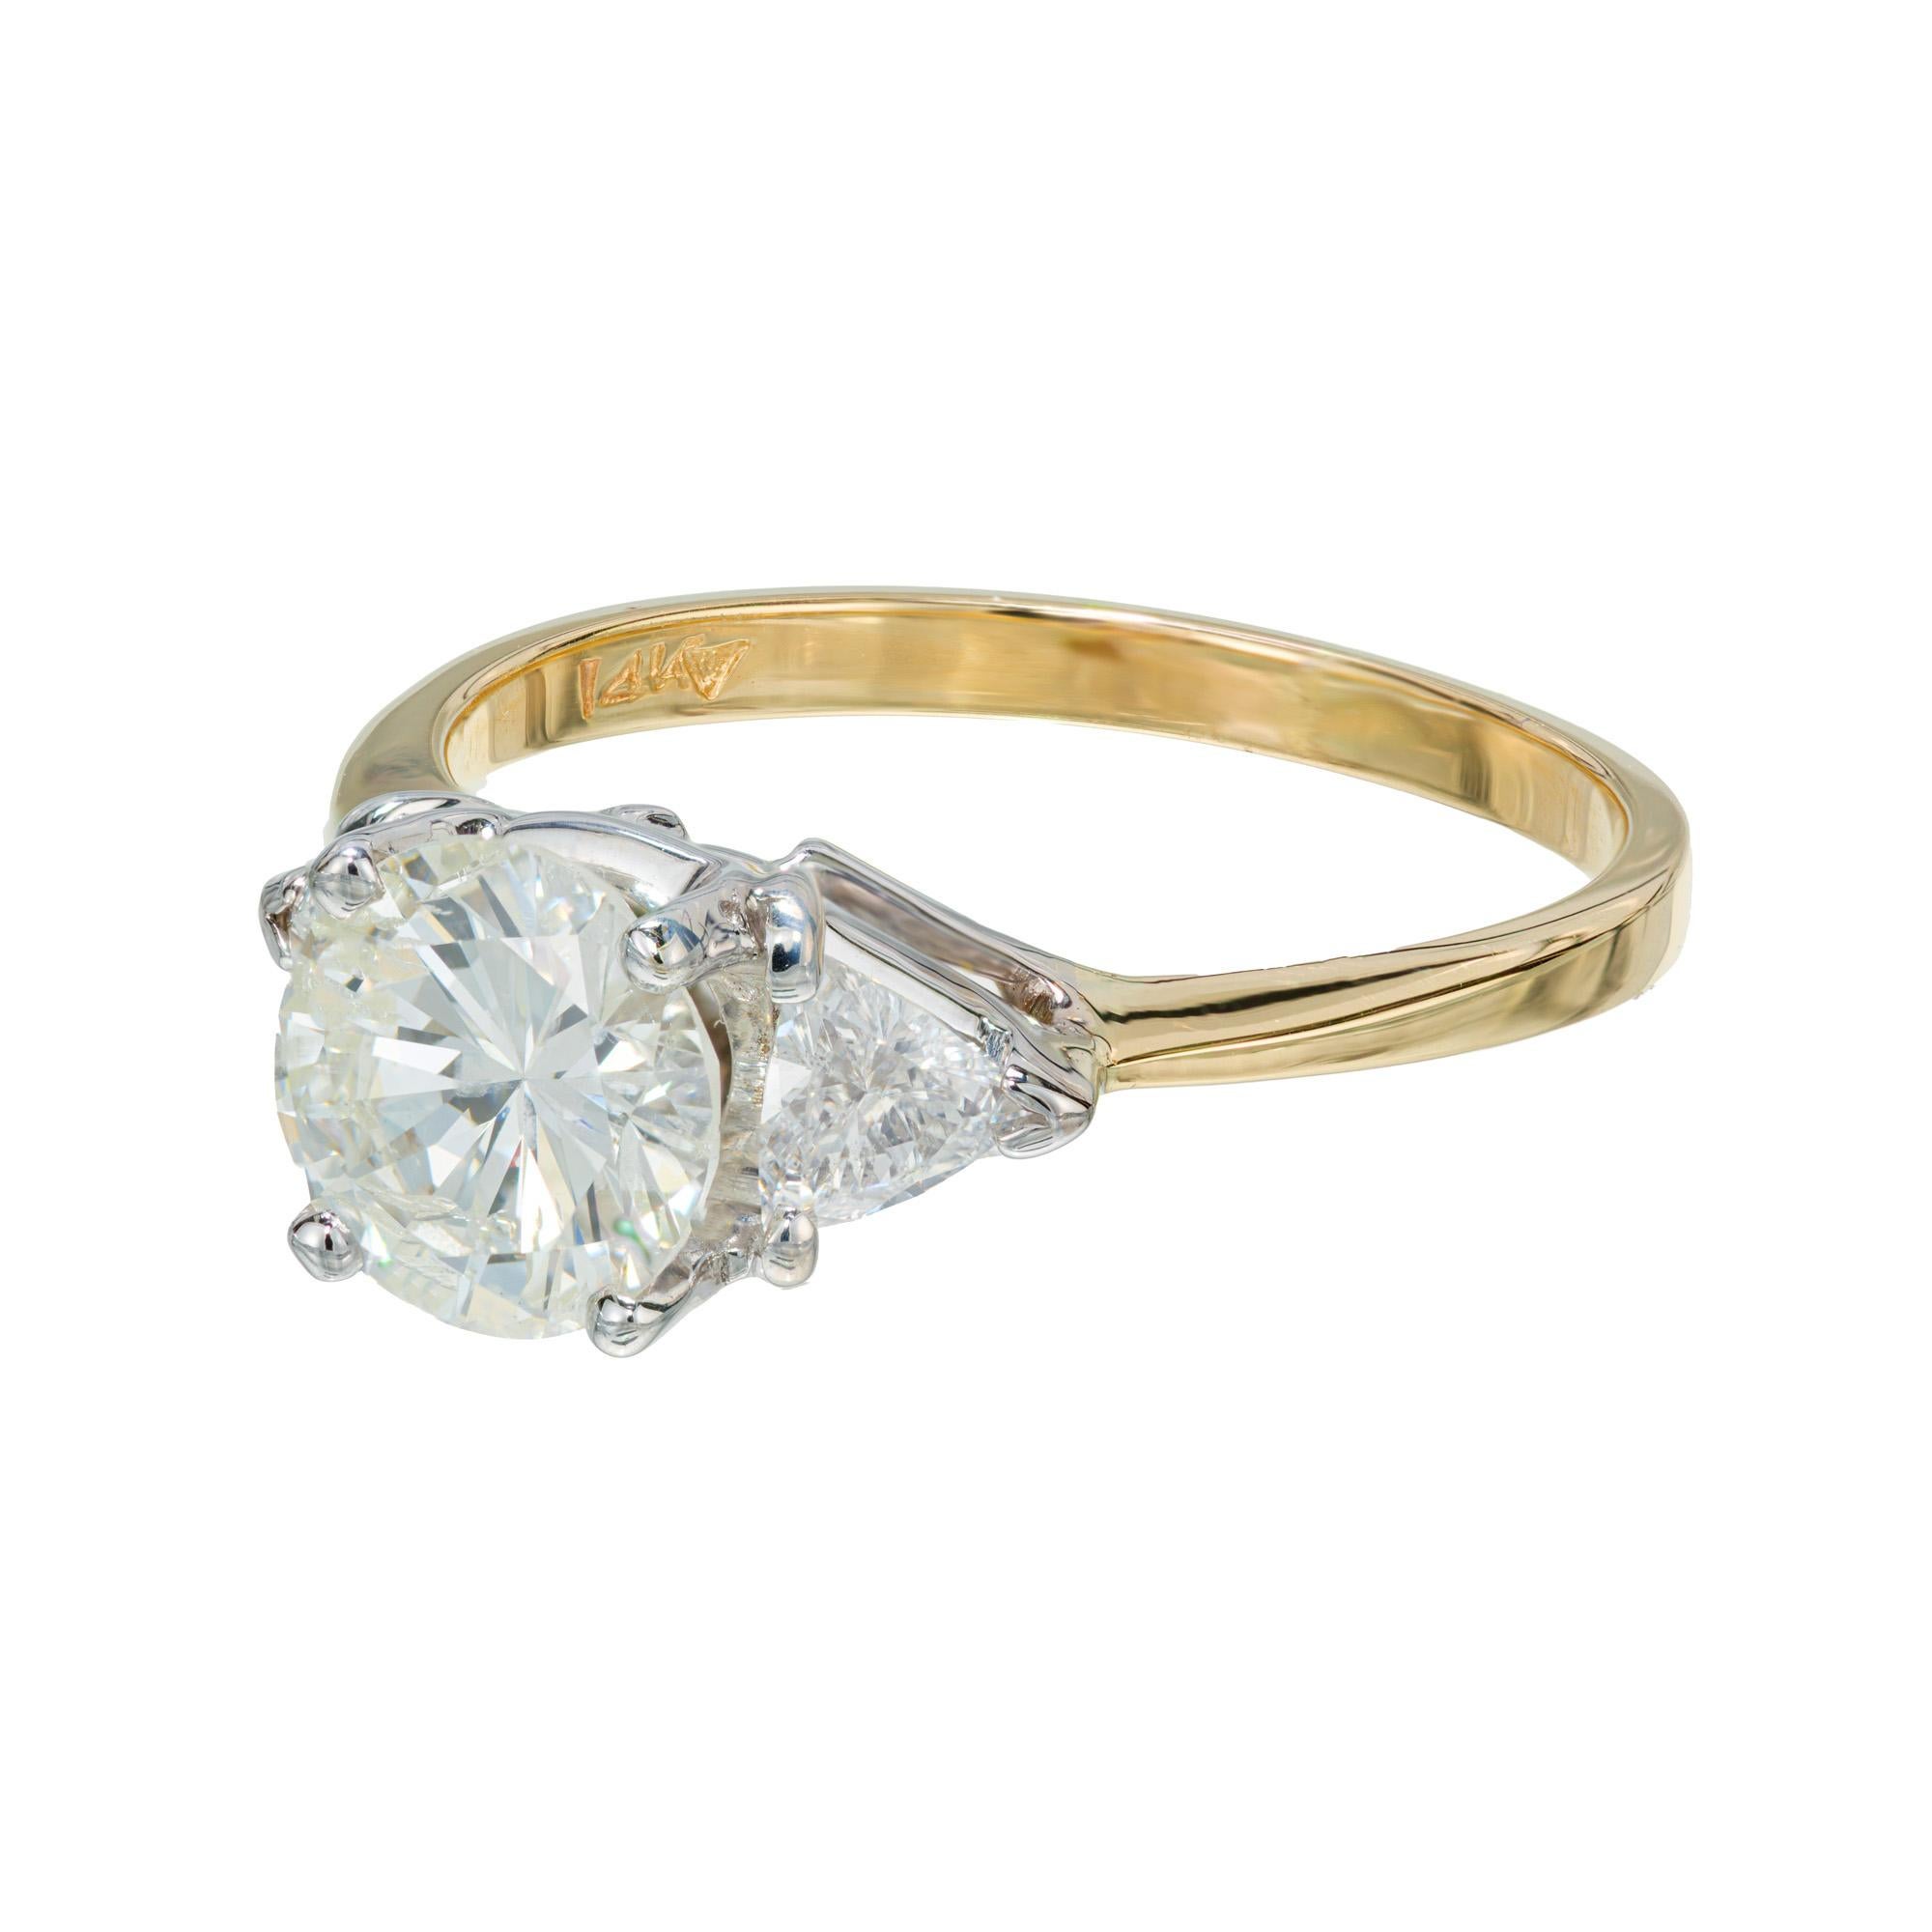 1980's diamond engagement ring. EGL certified 1.20cts round brilliant cut, H-I (near colorless) center diamond set in a 14k white gold crown with a 14k yellow gold shank. Complemented with two trilliant cut diamonds. 

1 round brilliant cut